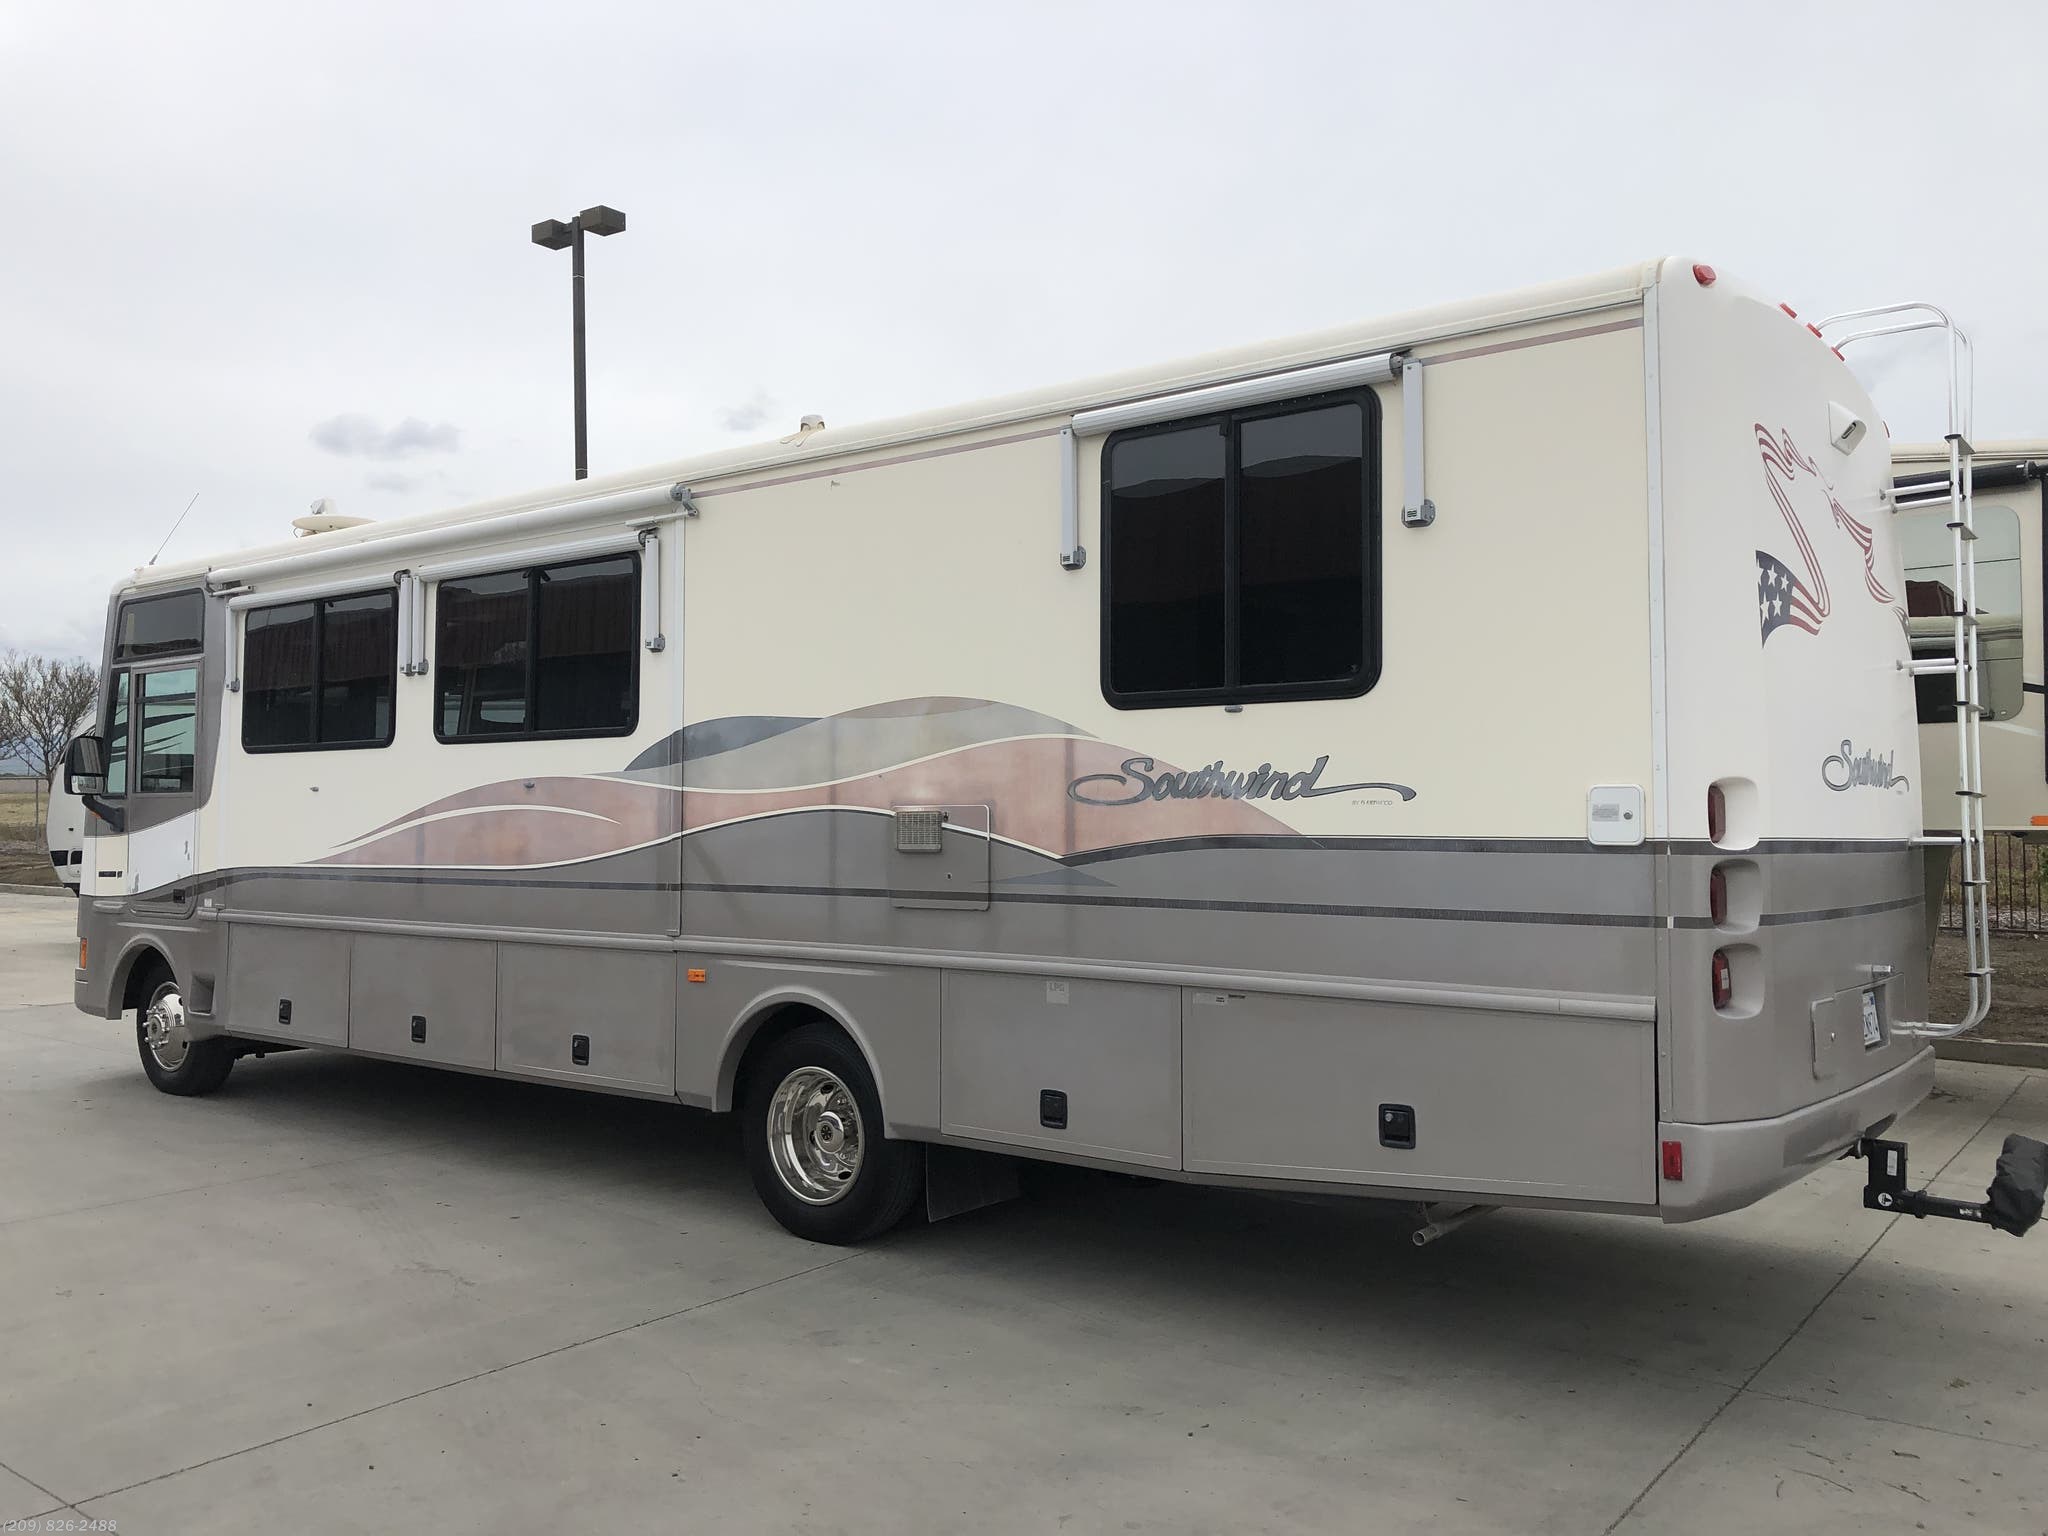 1999 Fleetwood RV Southwind 32V for Sale in Los Banos, CA 93635 | 3175x 1999 Fleetwood Southwind 32v For Sale